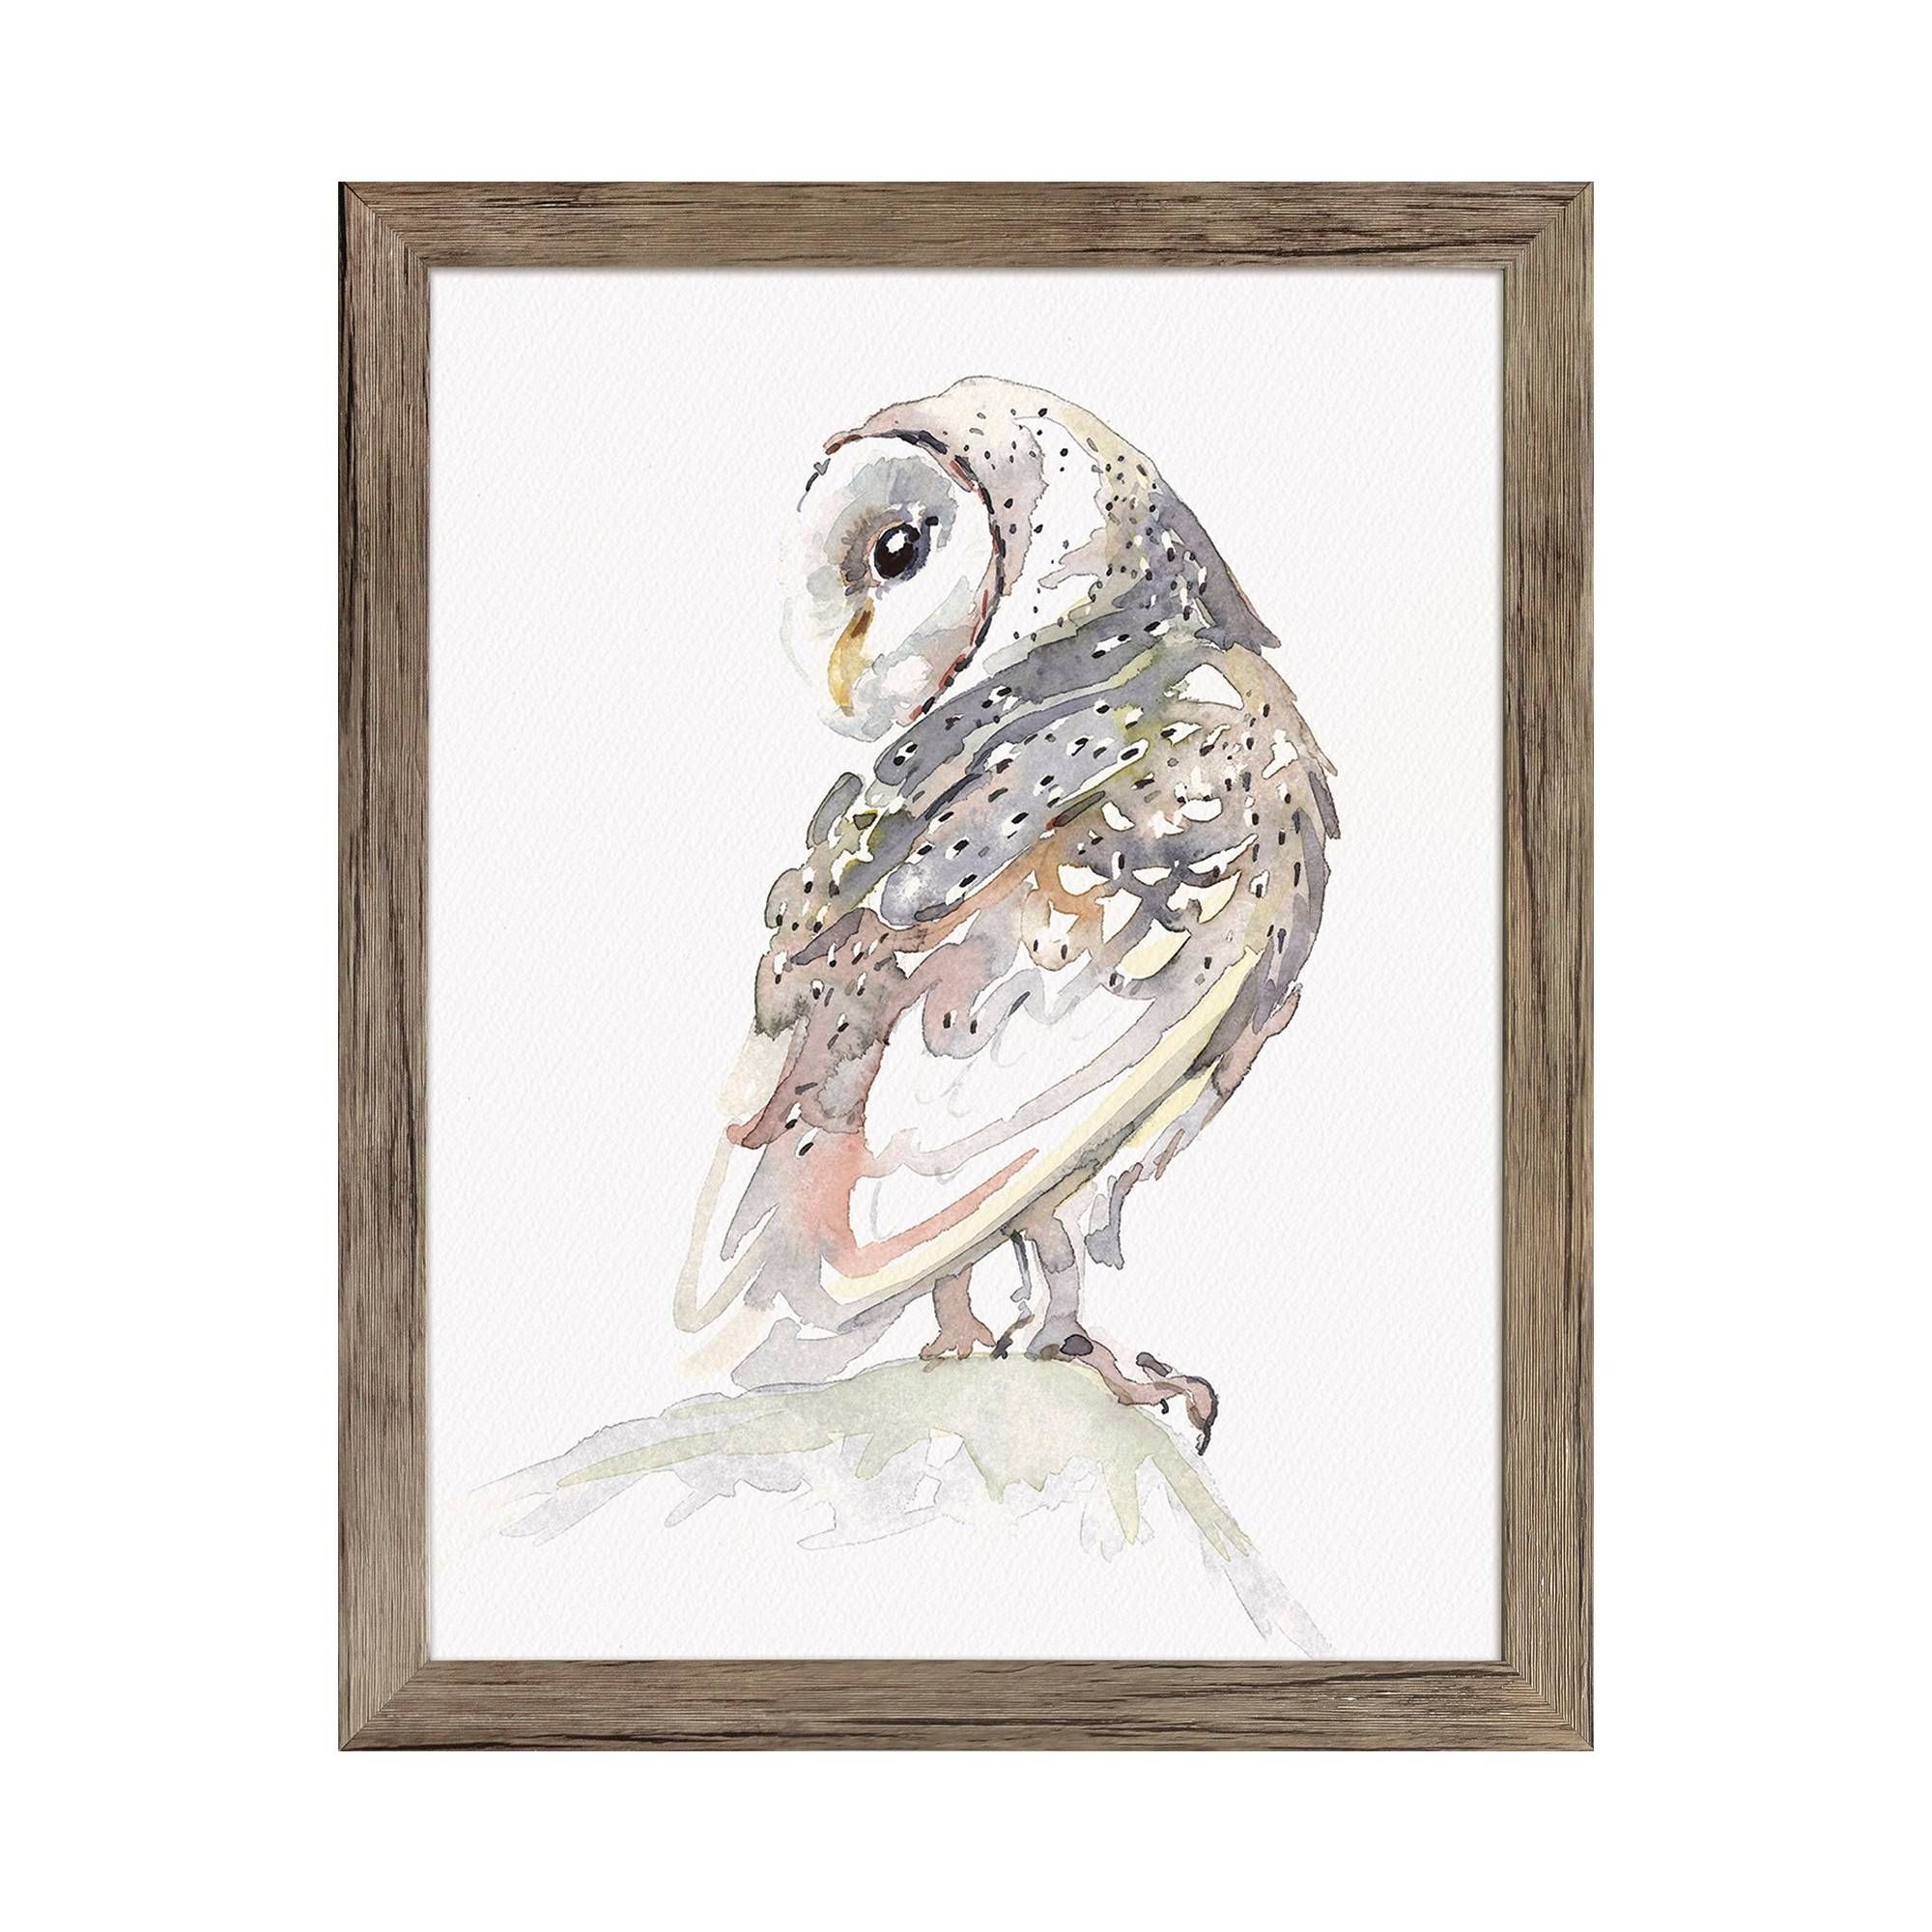 Framed Watercolor Owl 11"x14" – Threshold, $ (View 5 of 20)